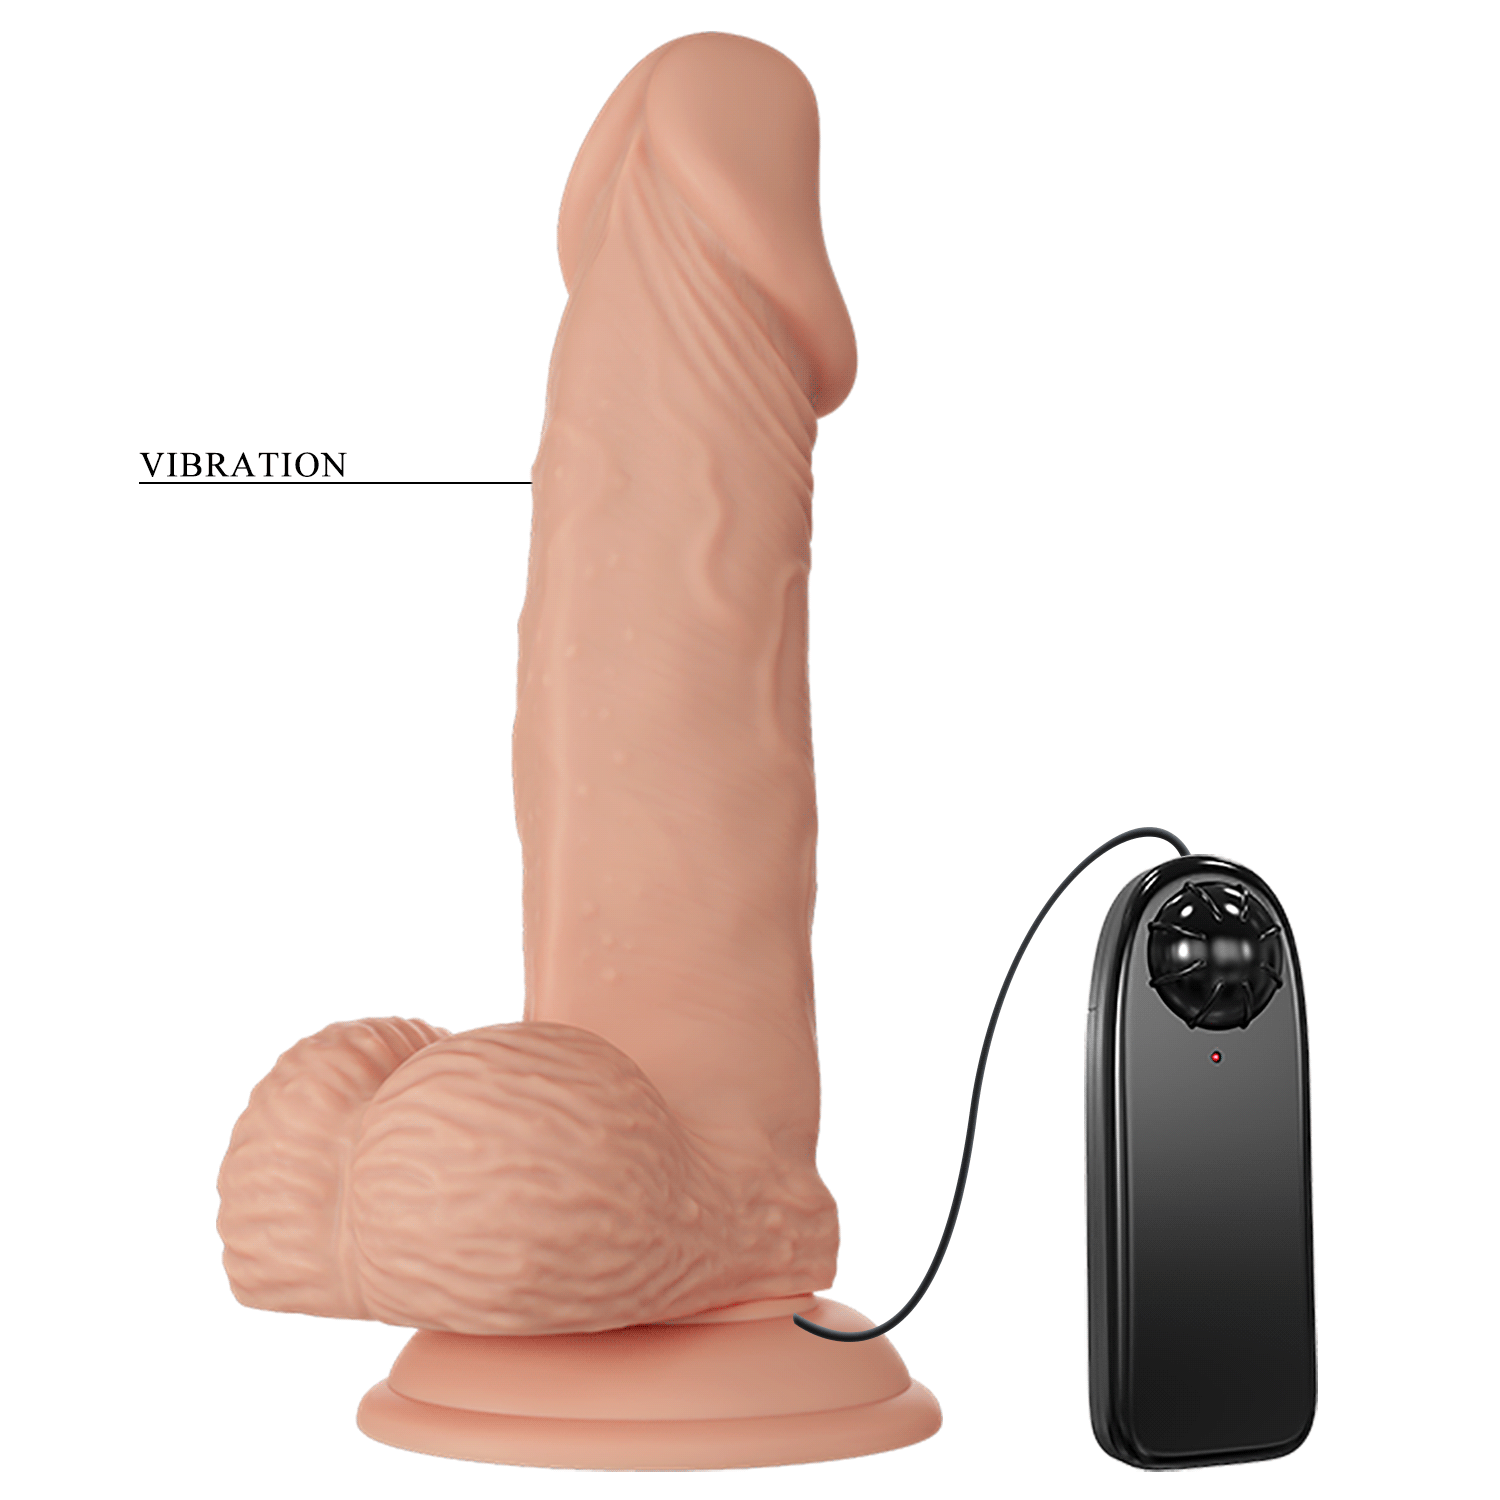 Baile 7.6 Inch Lifelike Vibrating Dildo with Suction Cup in Flesh